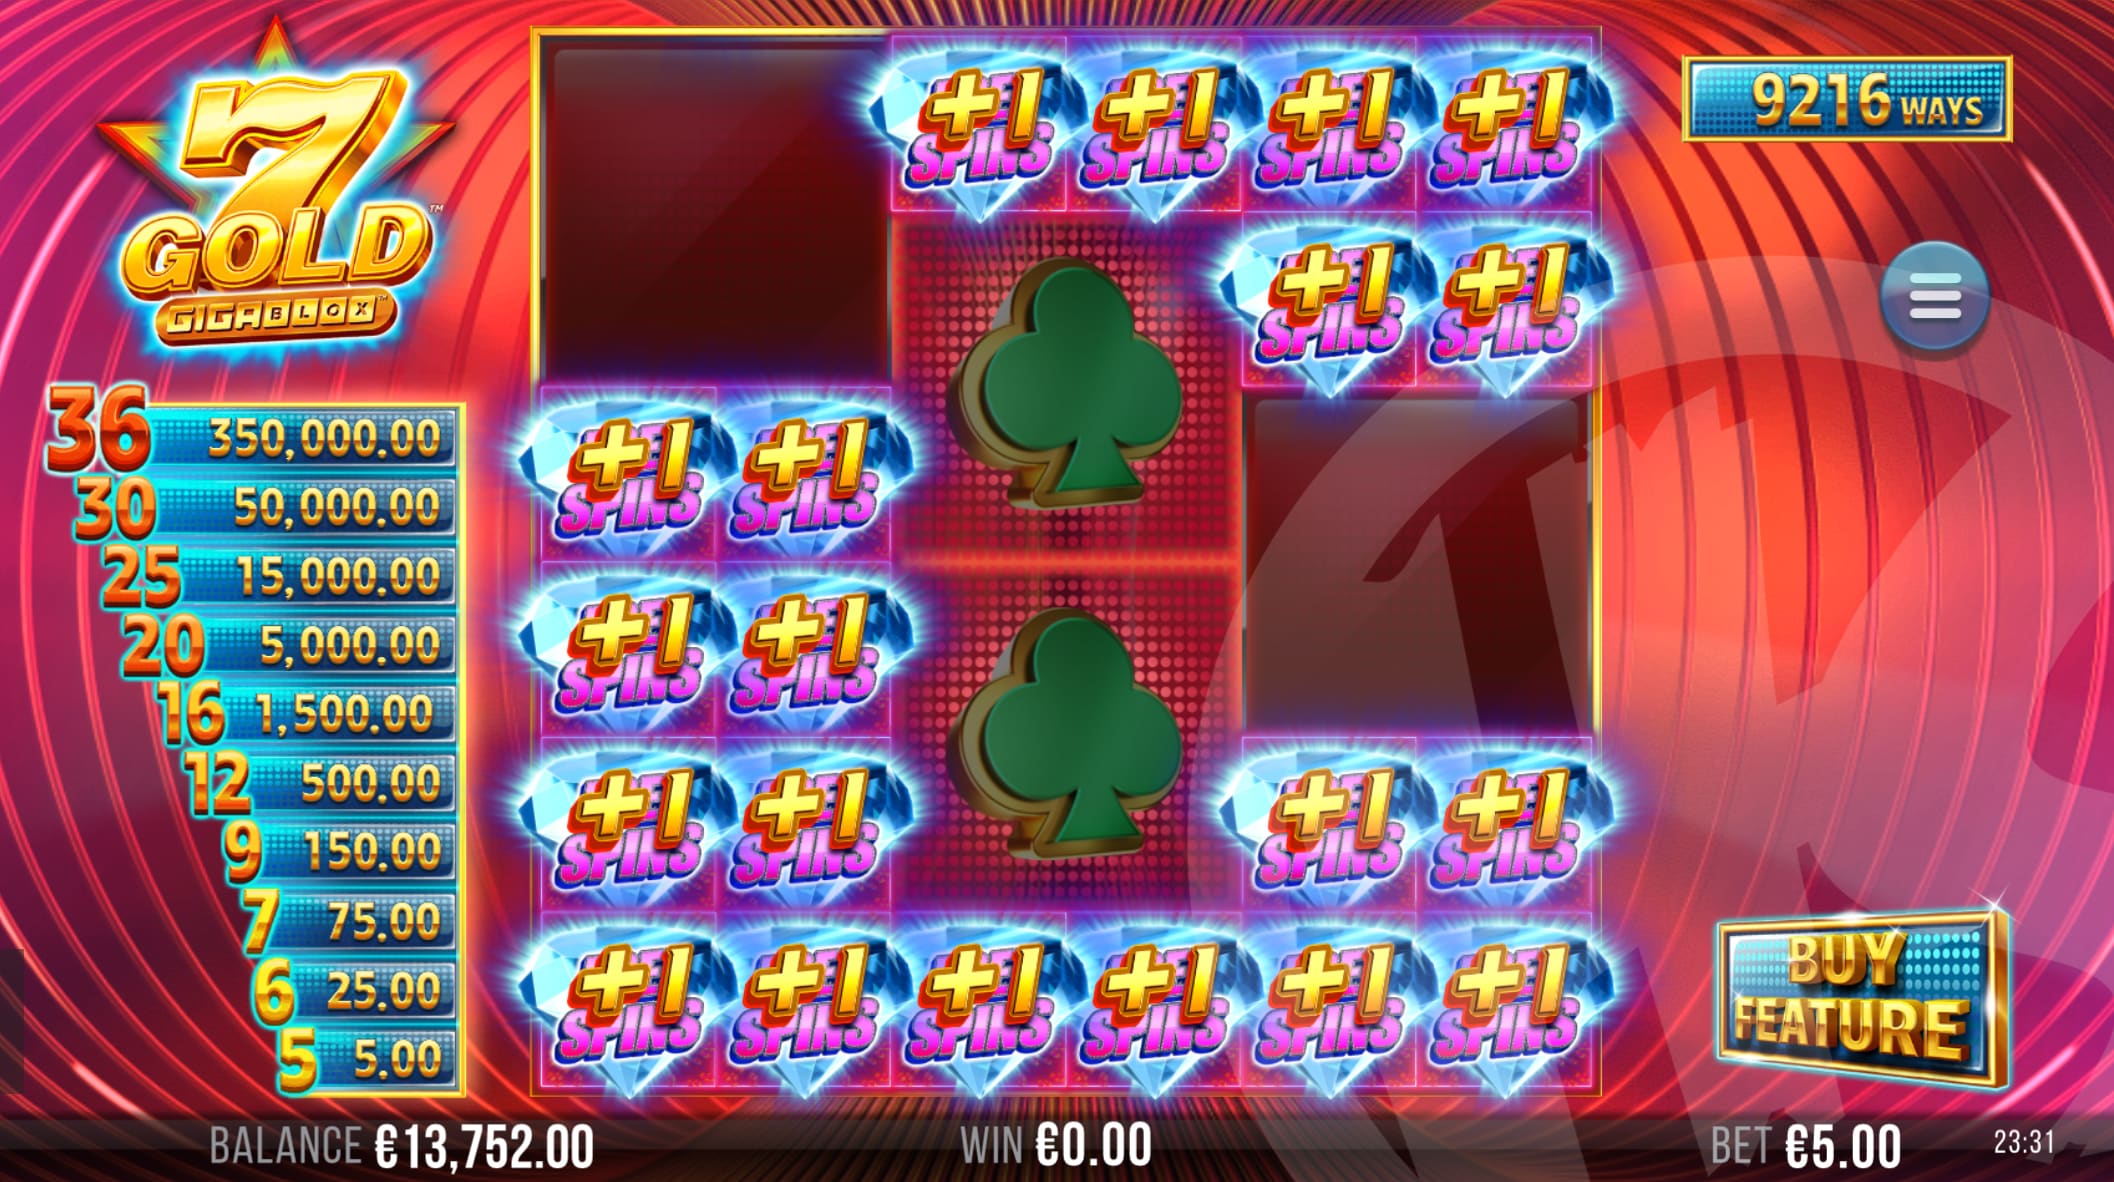 Land 5 or More Scatters to Trigger Free Spins